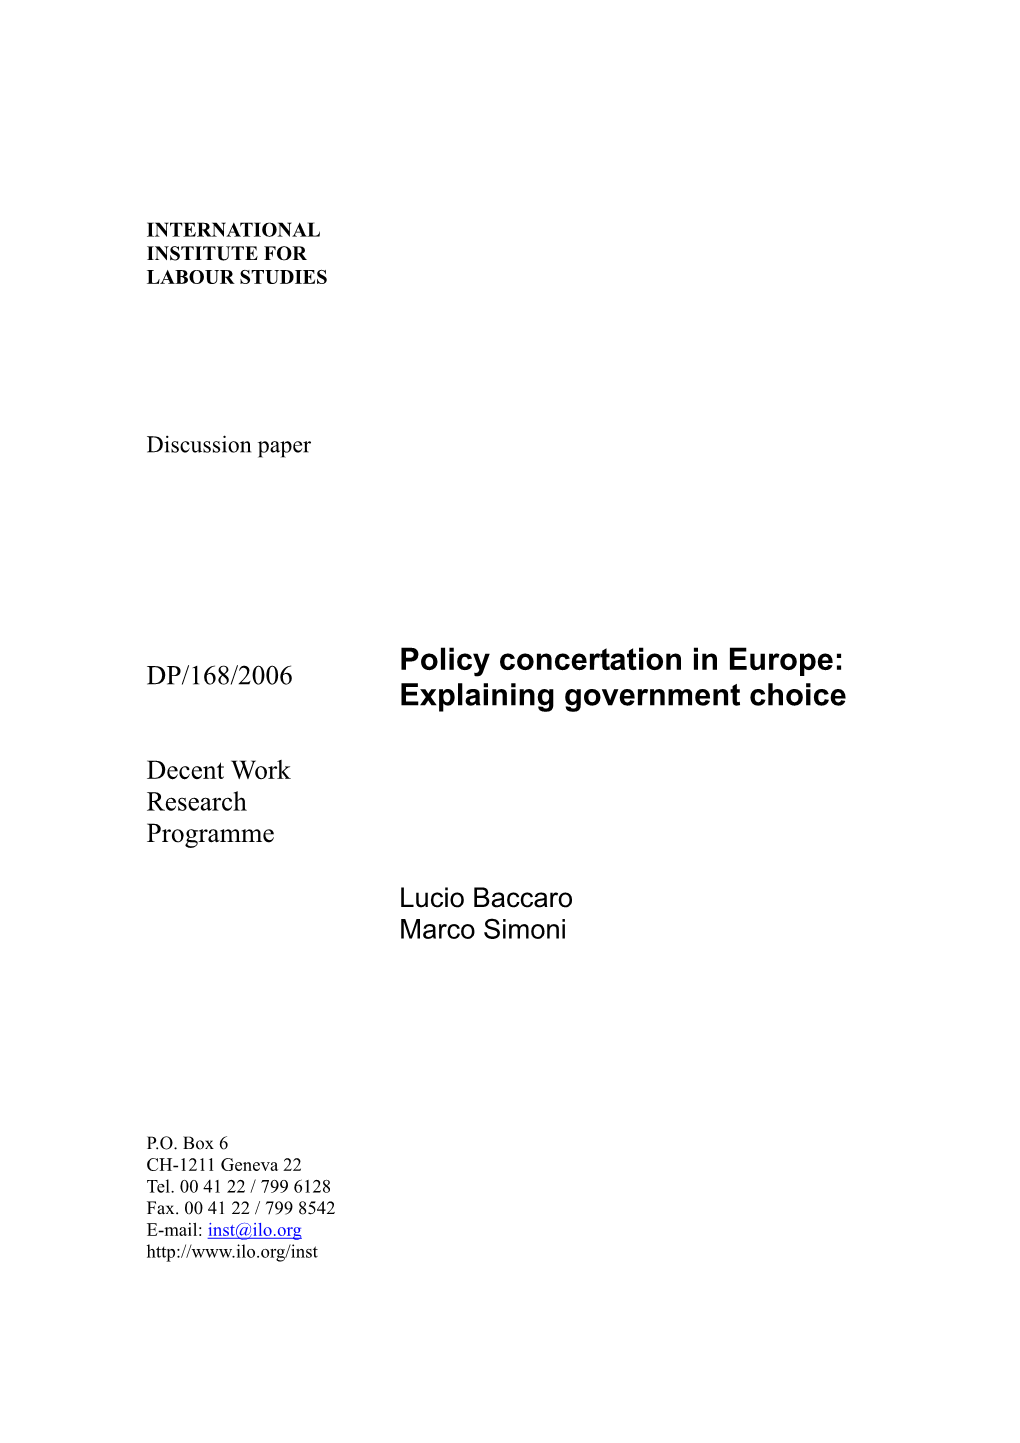 Policy Concertation in Europe: Explaining Government Choice